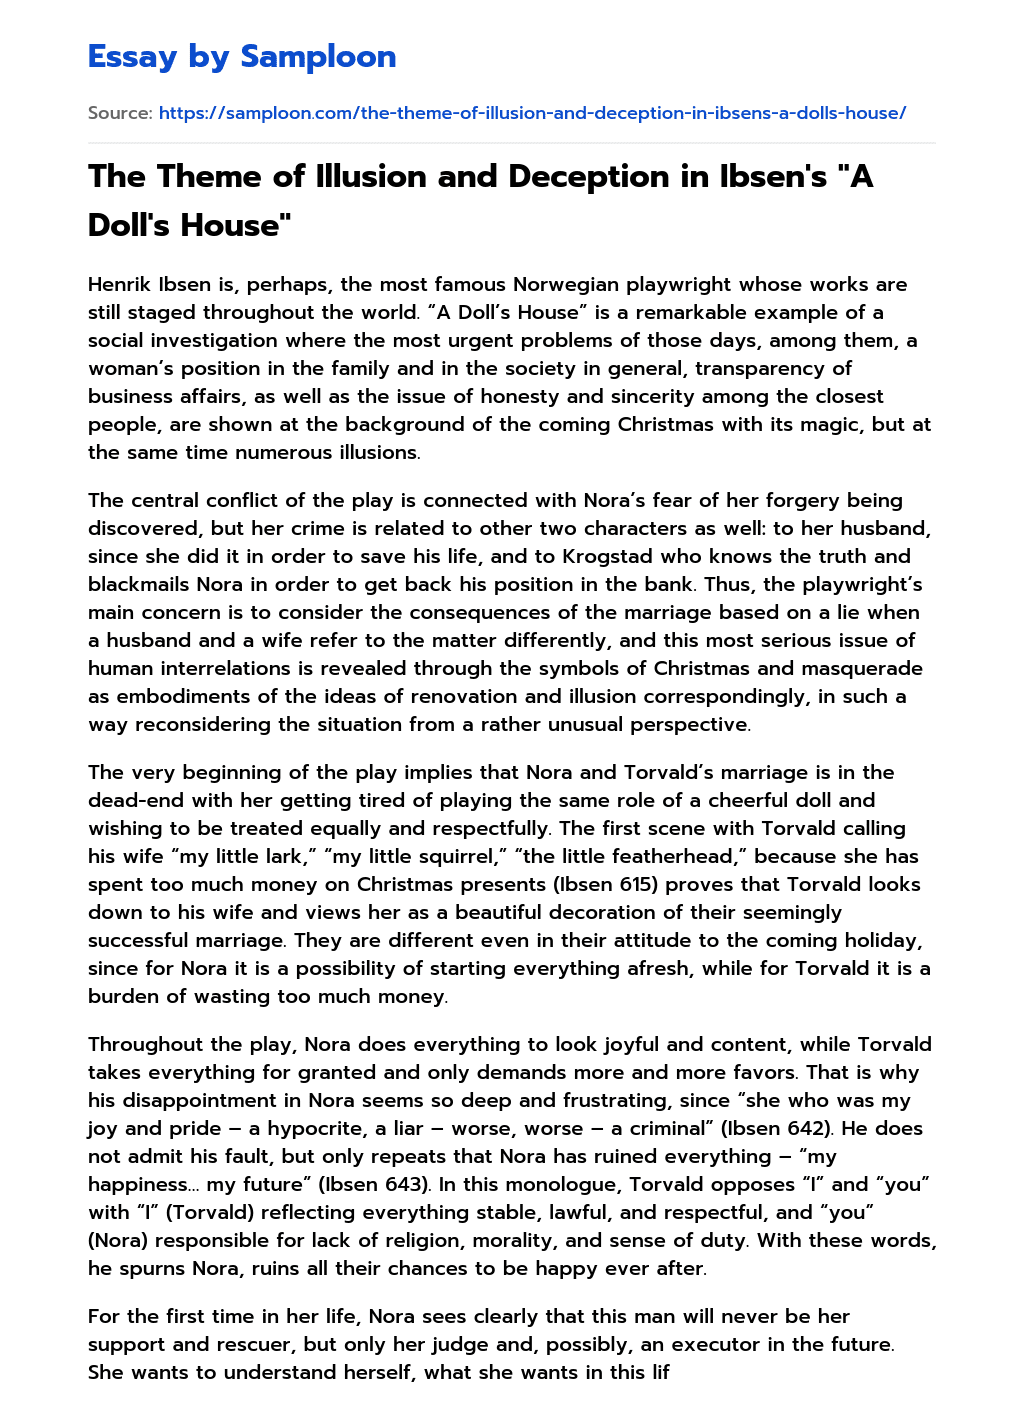 deception in a doll's house essay